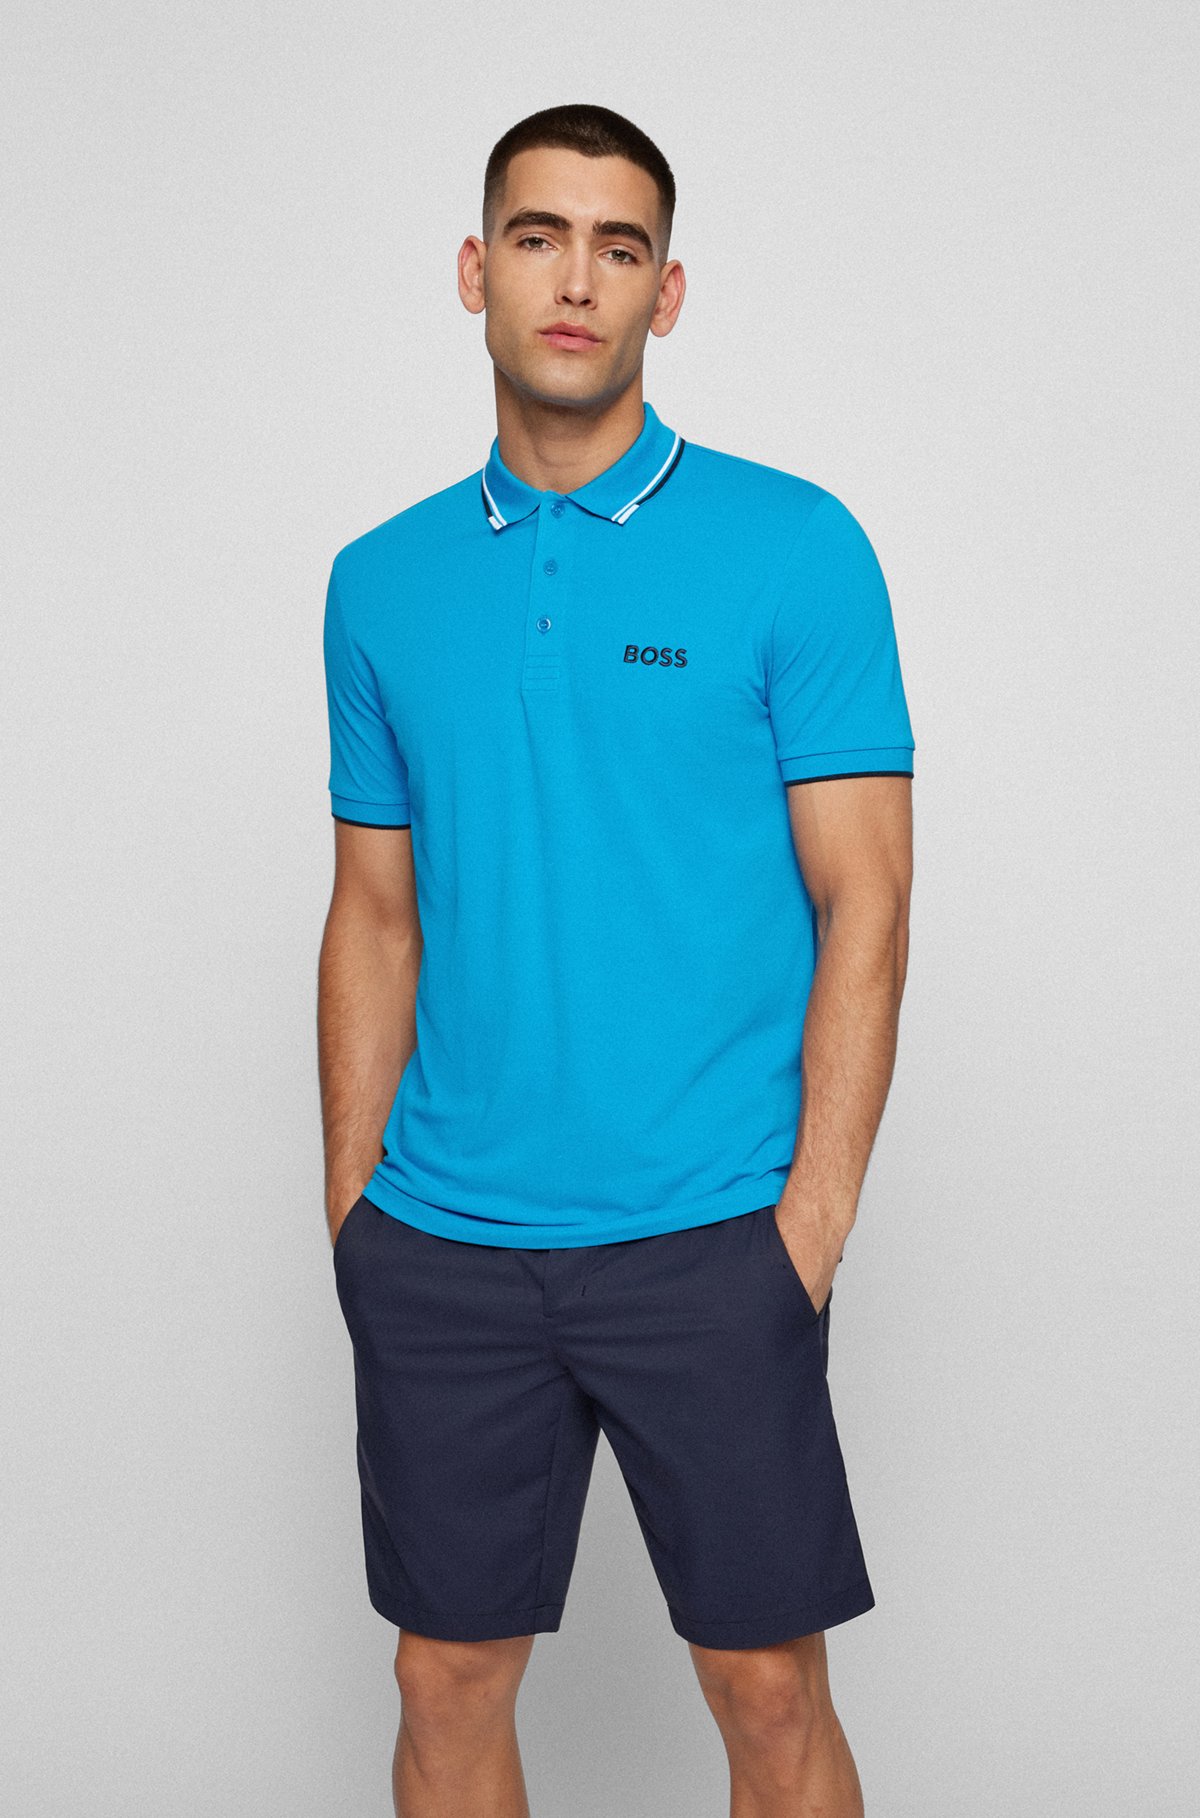 droog Alarmerend exegese BOSS - Cotton-blend polo shirt with logo details